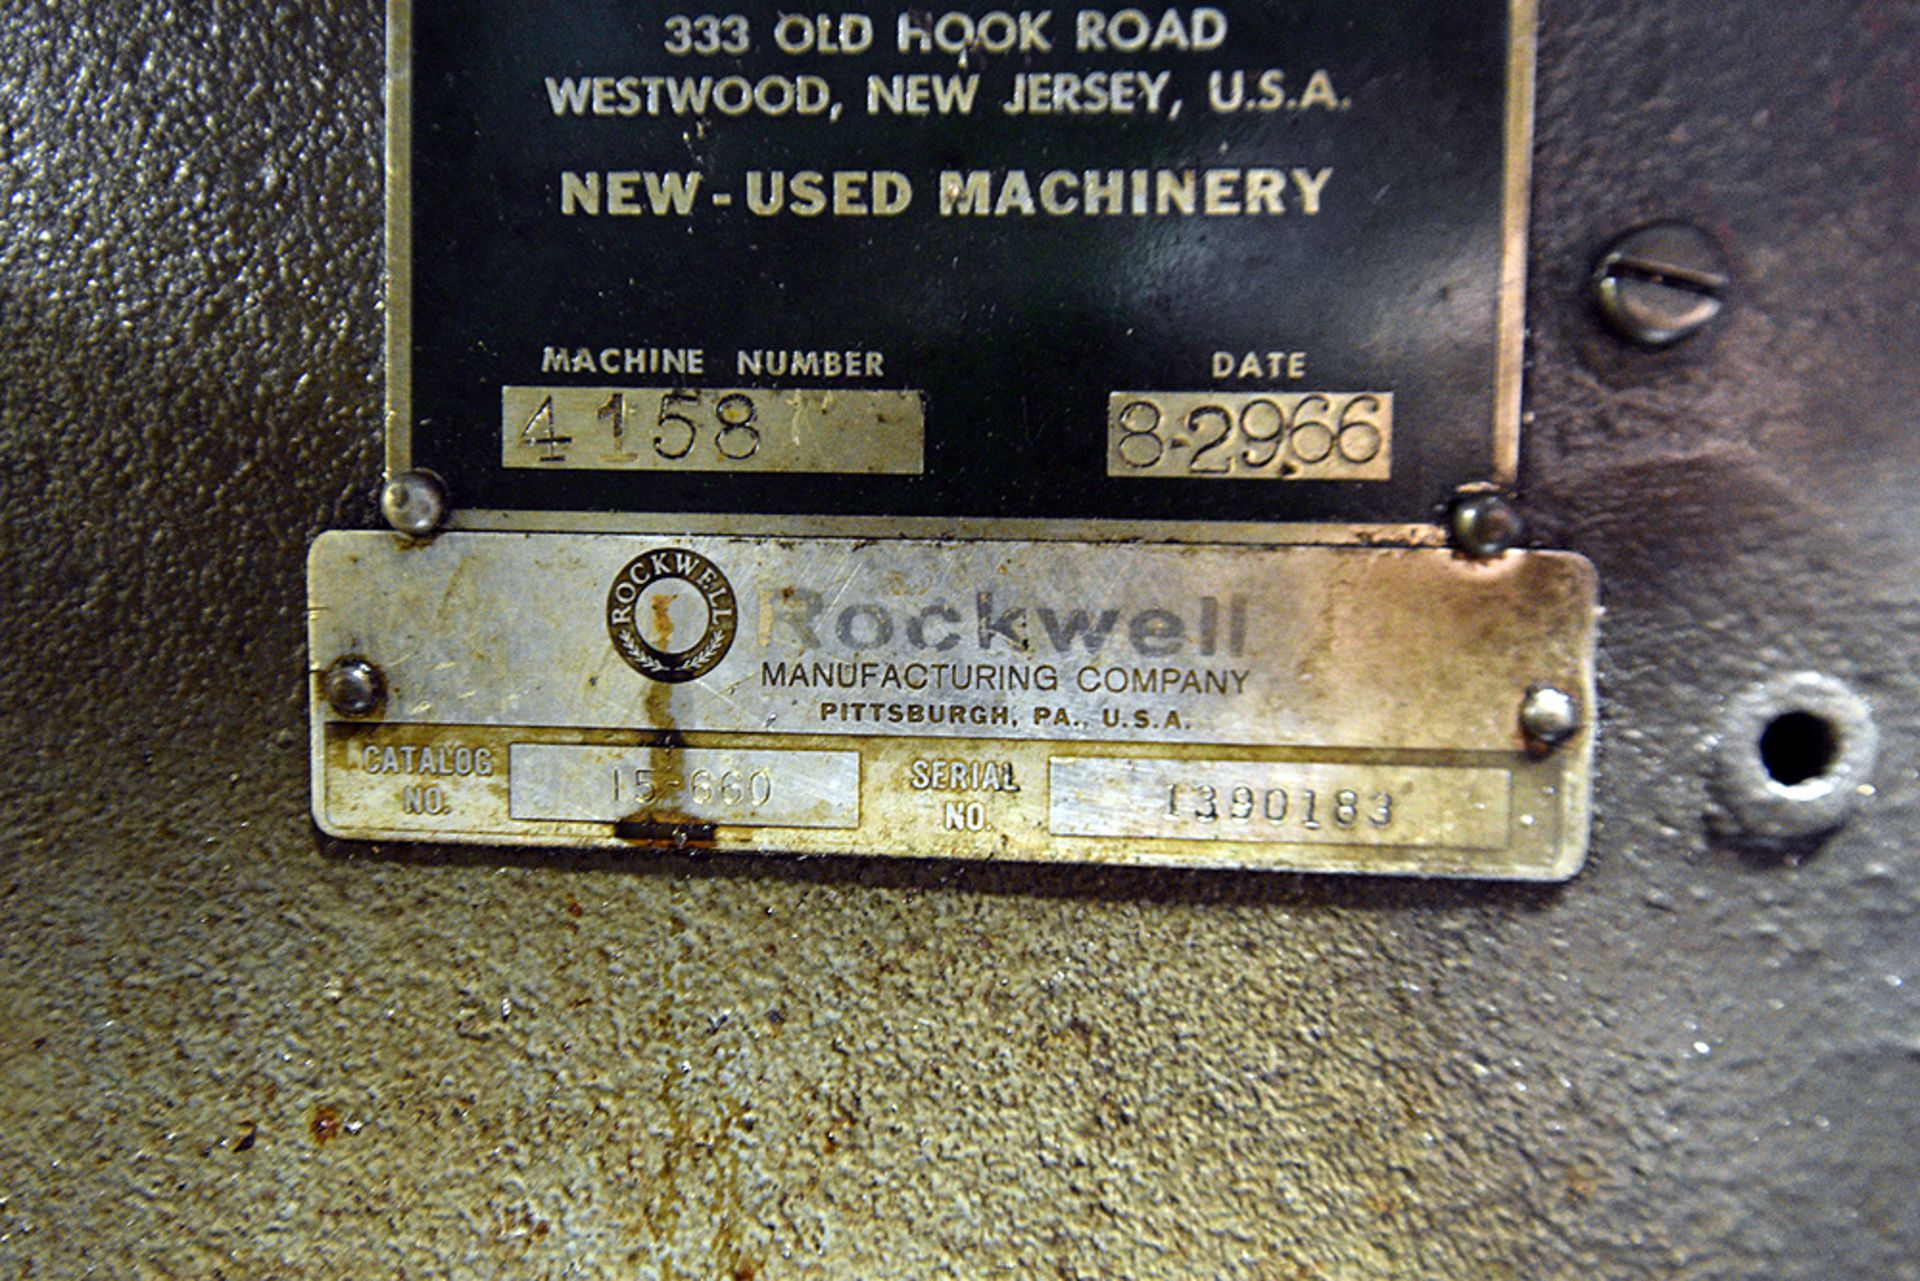 Delta Rockwell 15-660 Drill Press s/n 1390183 - Image 4 of 4